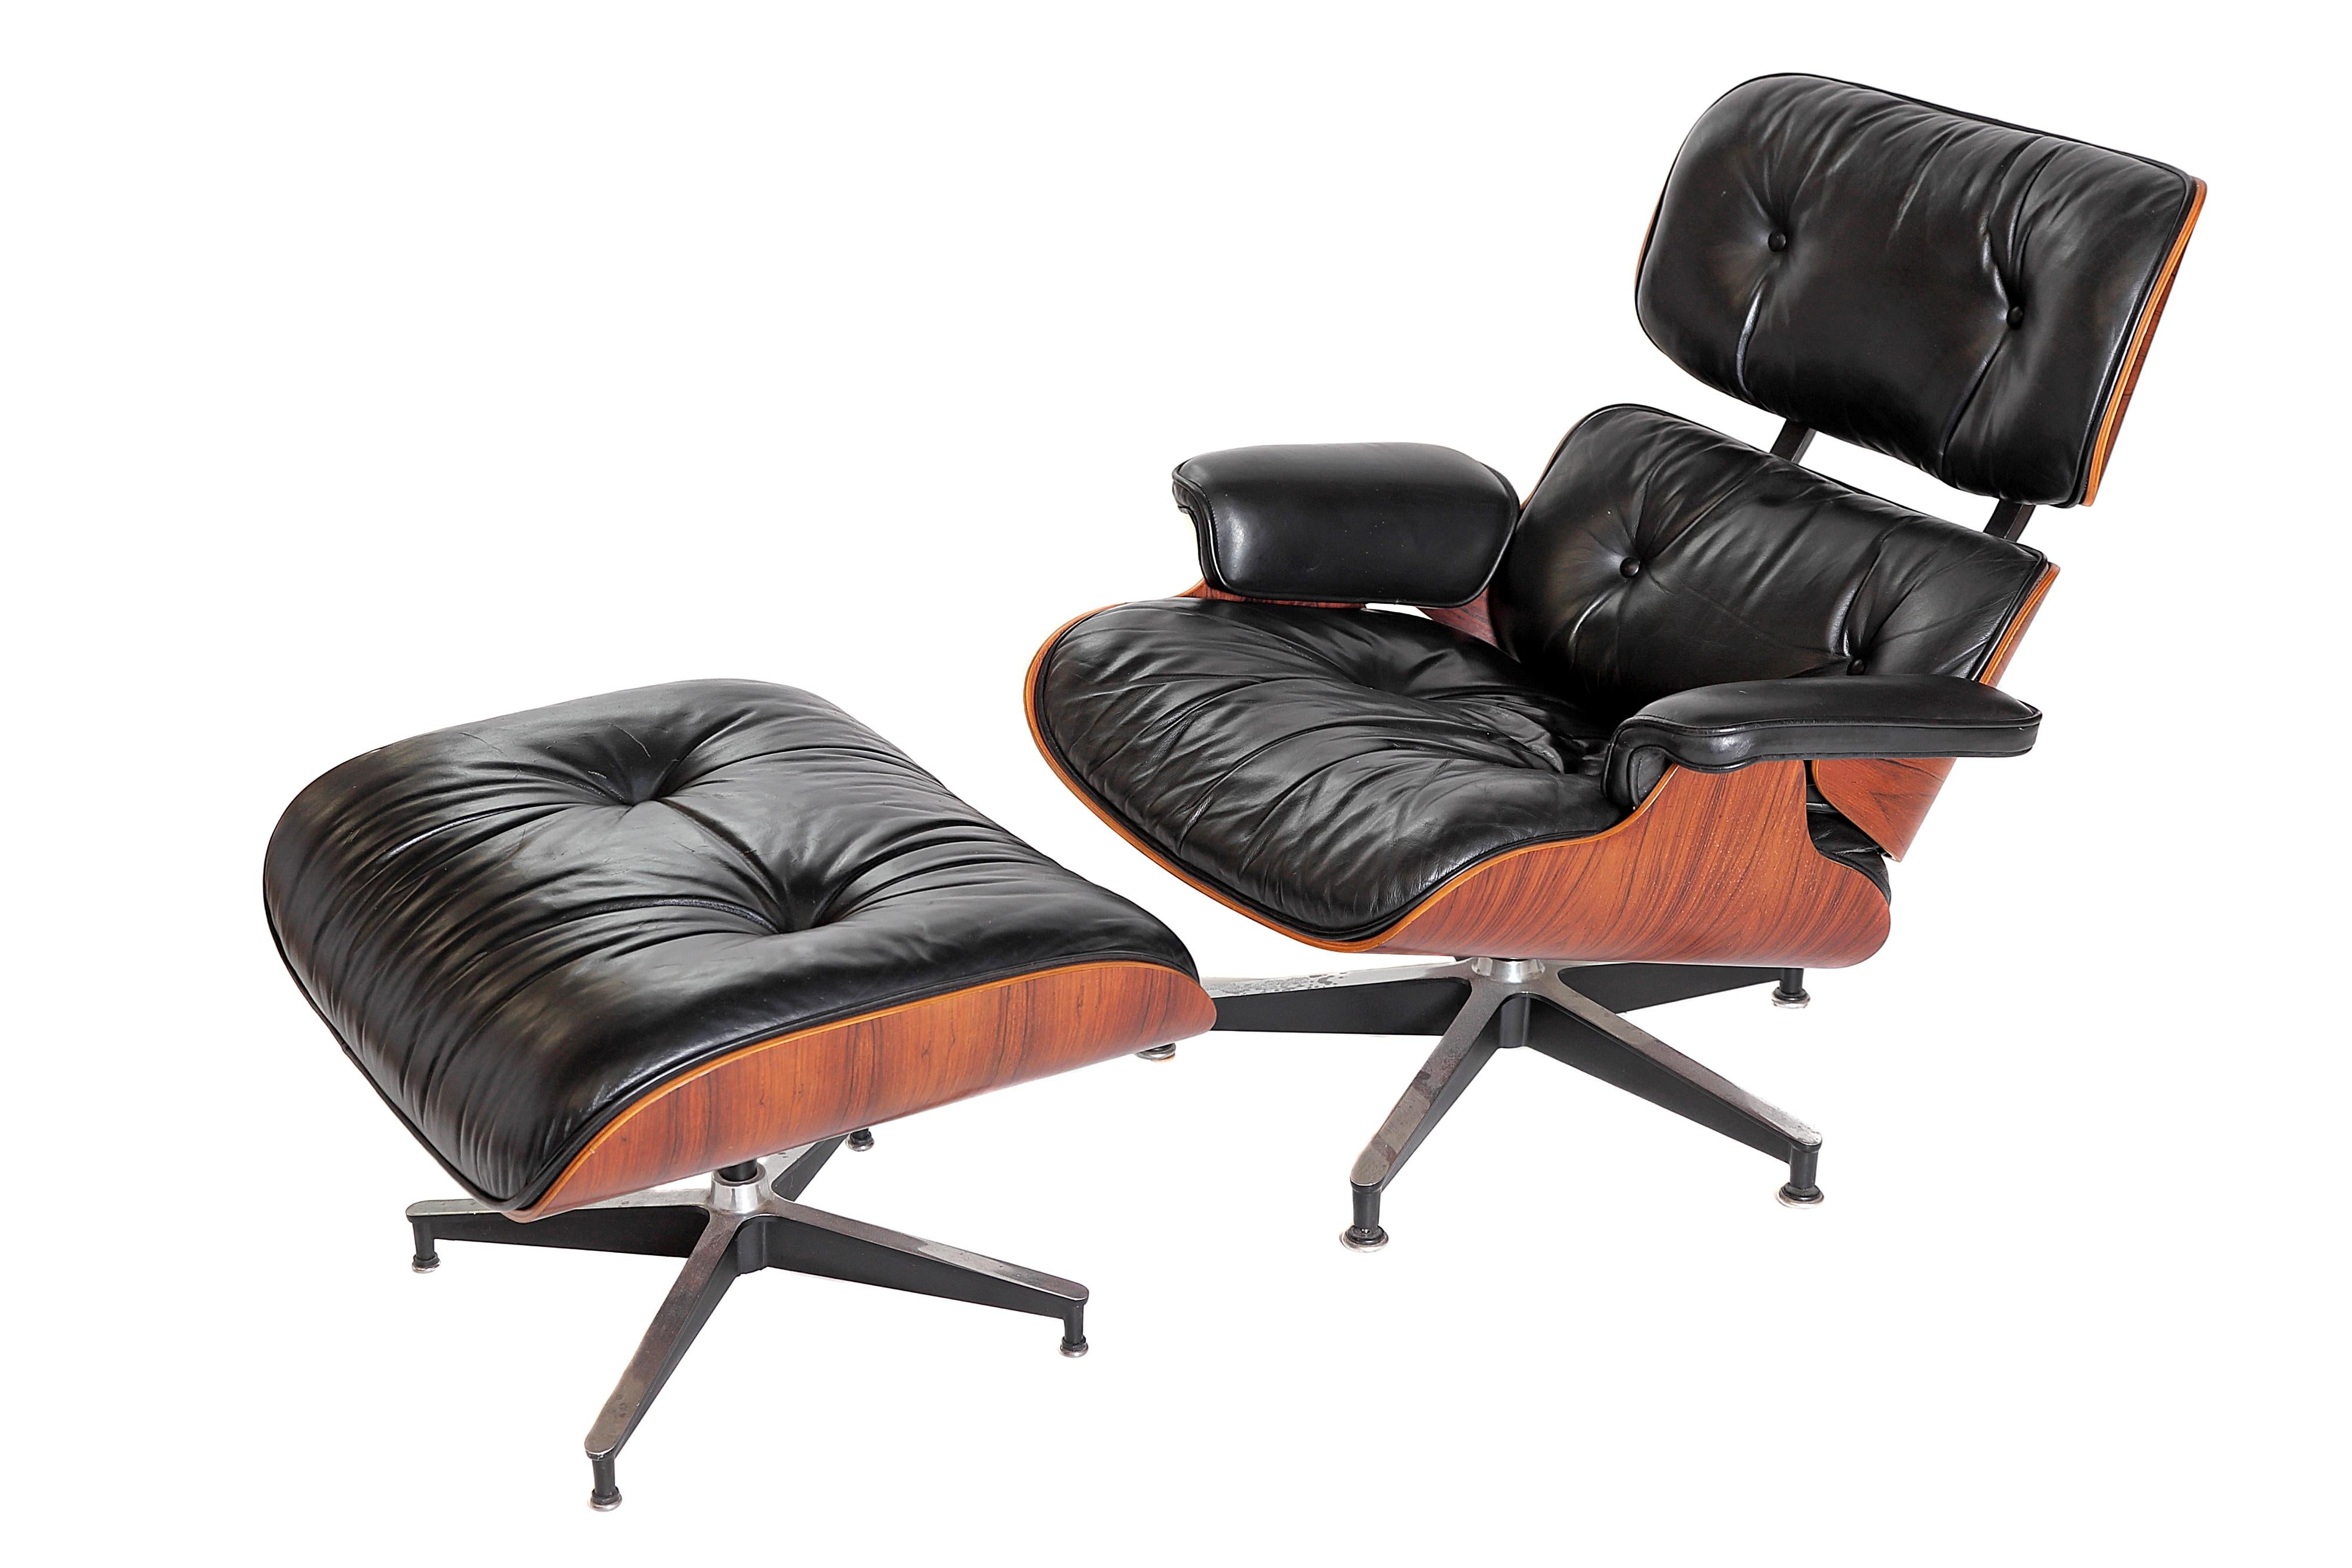 Eames lounge chair and ottoman in rosewood and black leather, circa 1983. Purchased from the original owner, tags intact on both the chair and ottoman.

**NOTE: This item is made with Brazilian Rosewood veneers and CANNOT be exported from the United